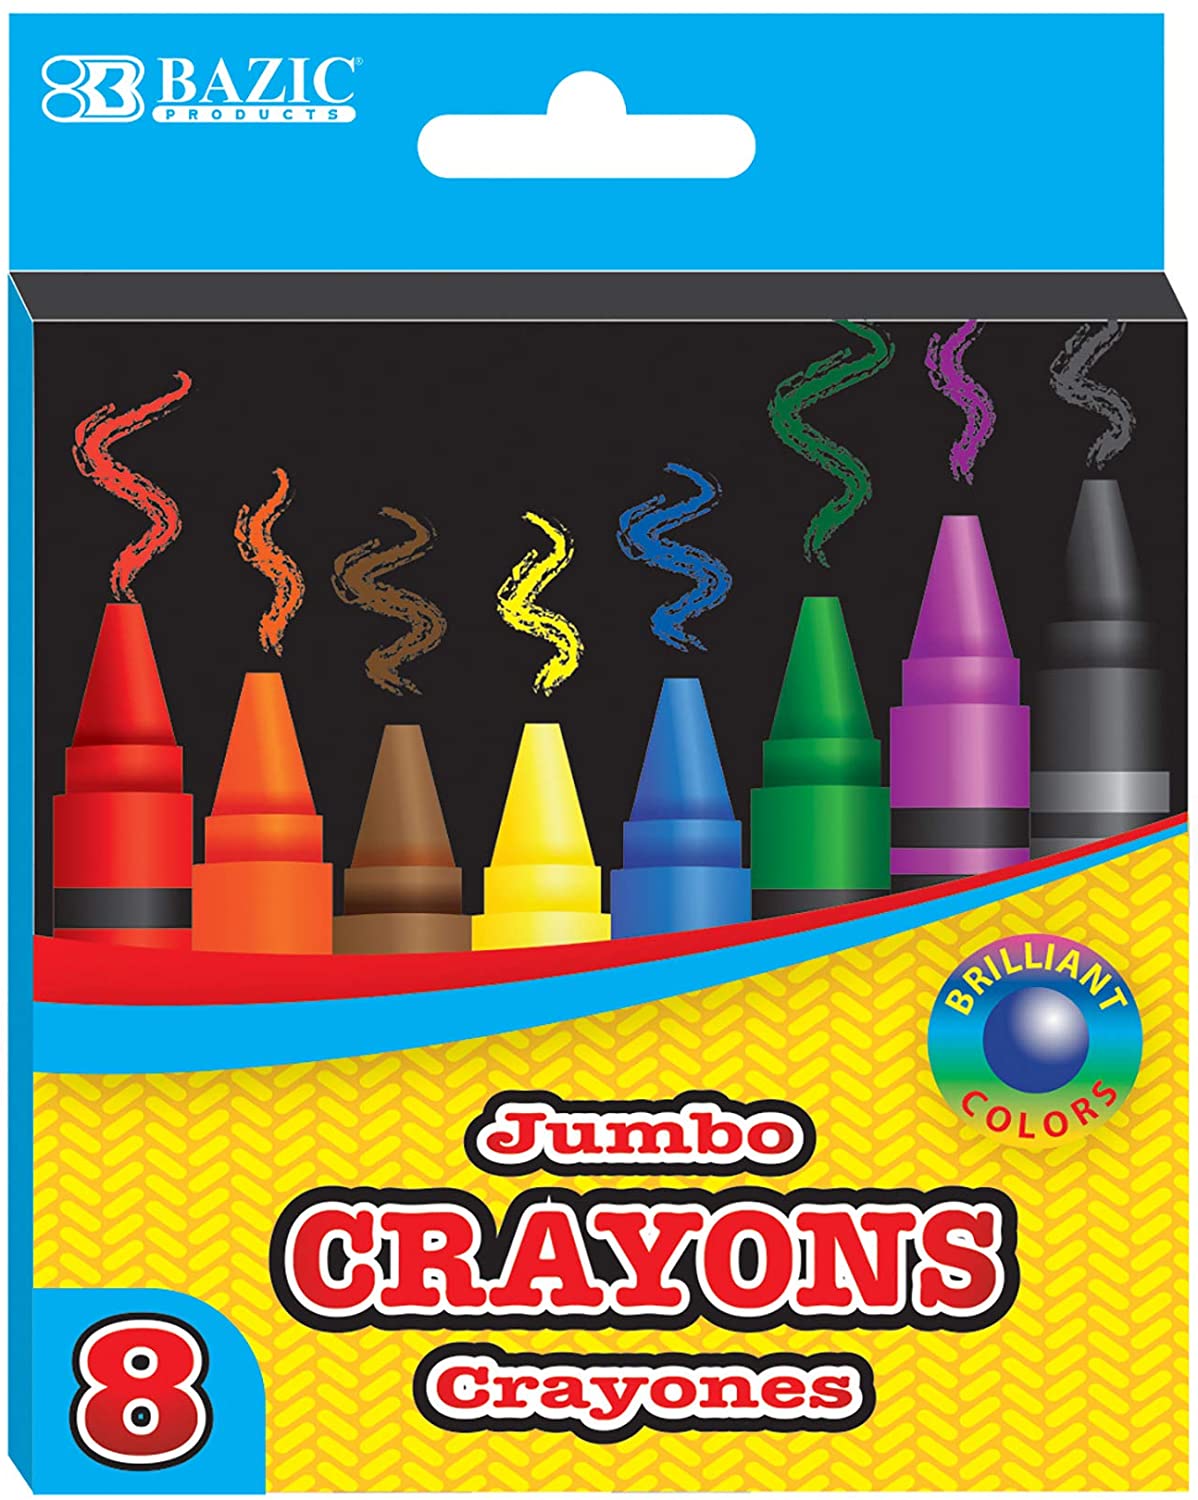 BAZIC 12 Color Premium Jumbo Crayons, Assorted Washable Coloring Set, School Art Gift for Kids Age 3+, 1-Pack.